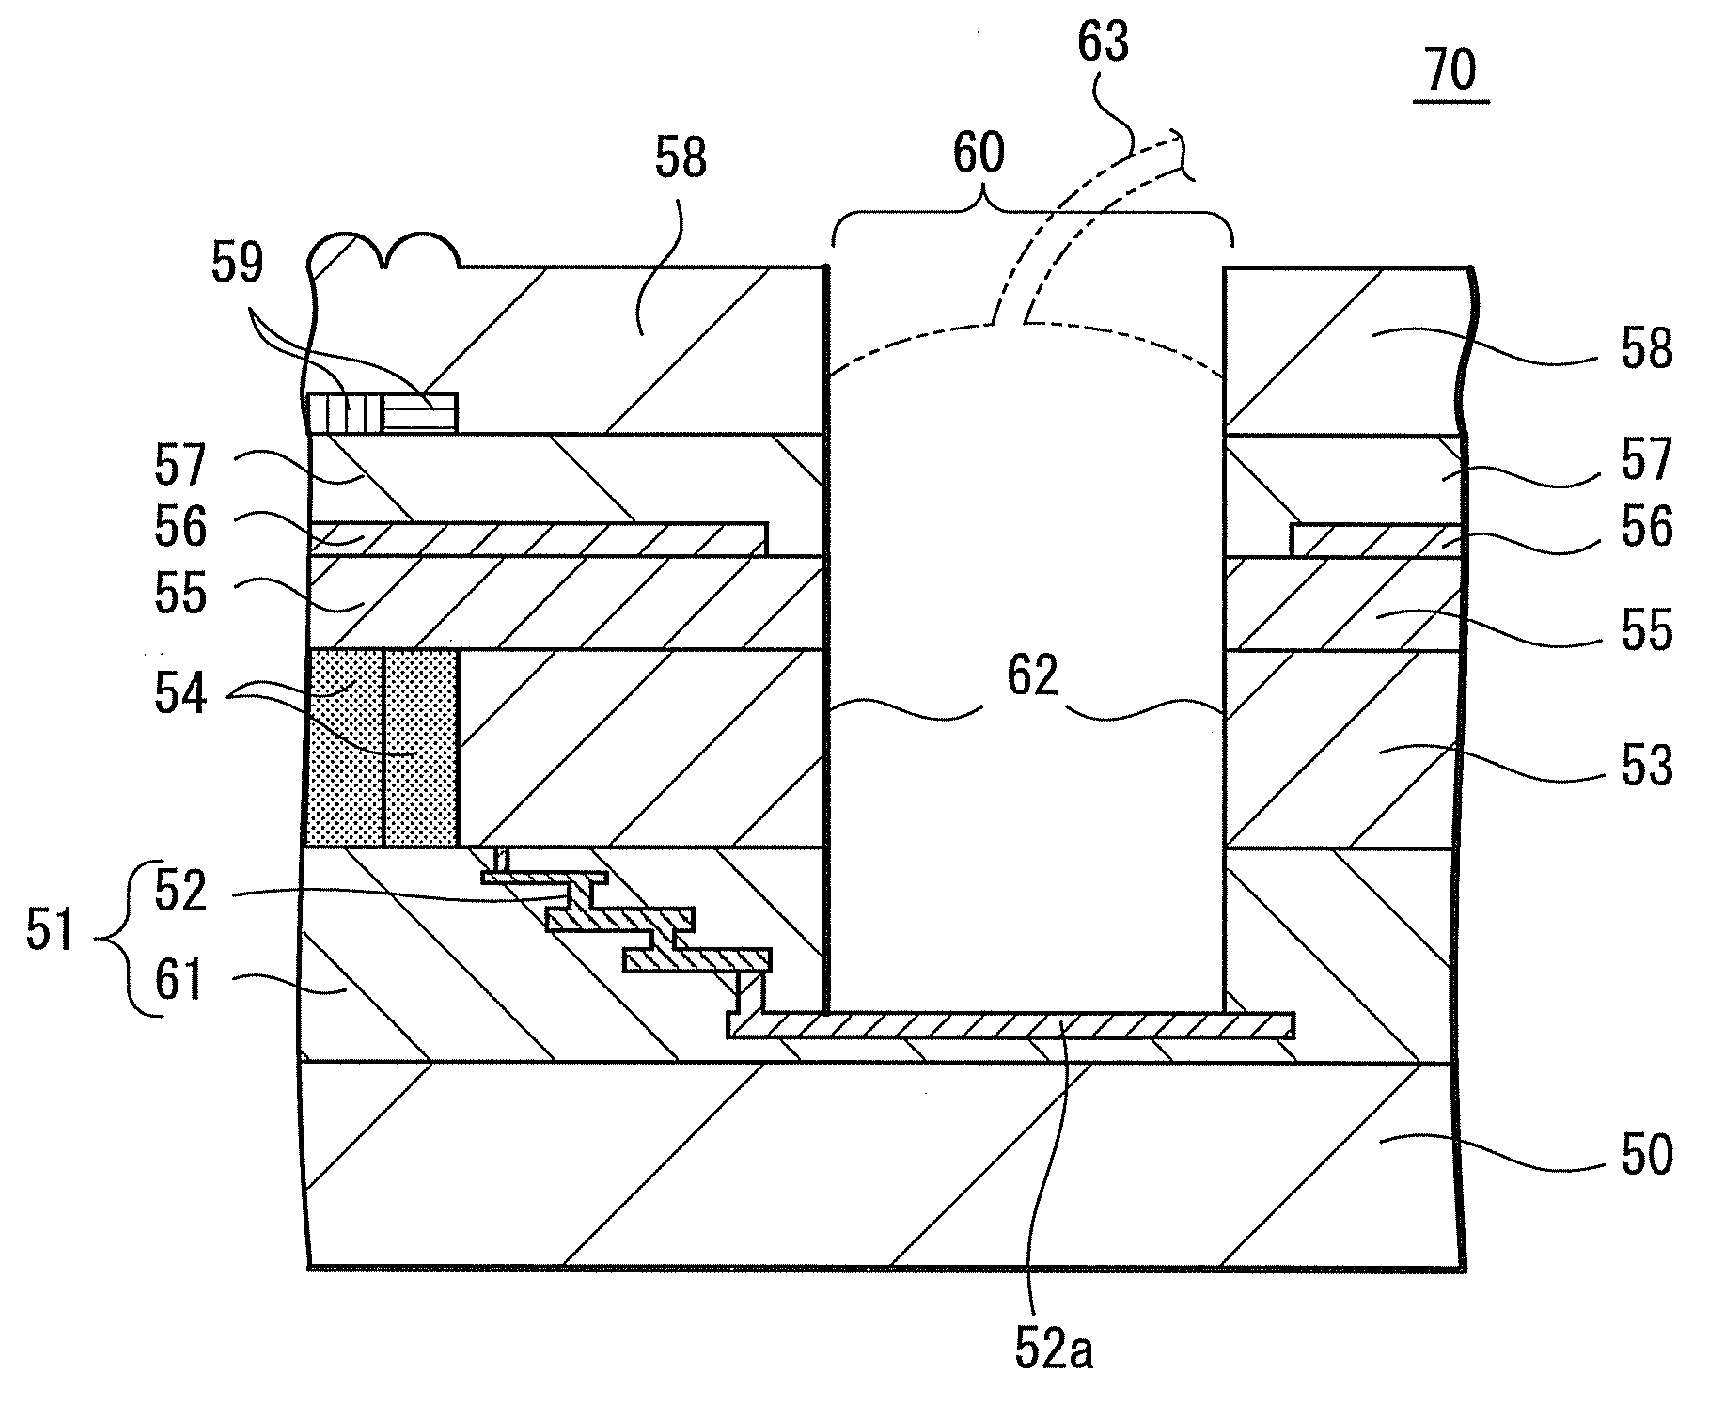 Solid-state imaging device, method of fabricating solid-state imaging device, and camera